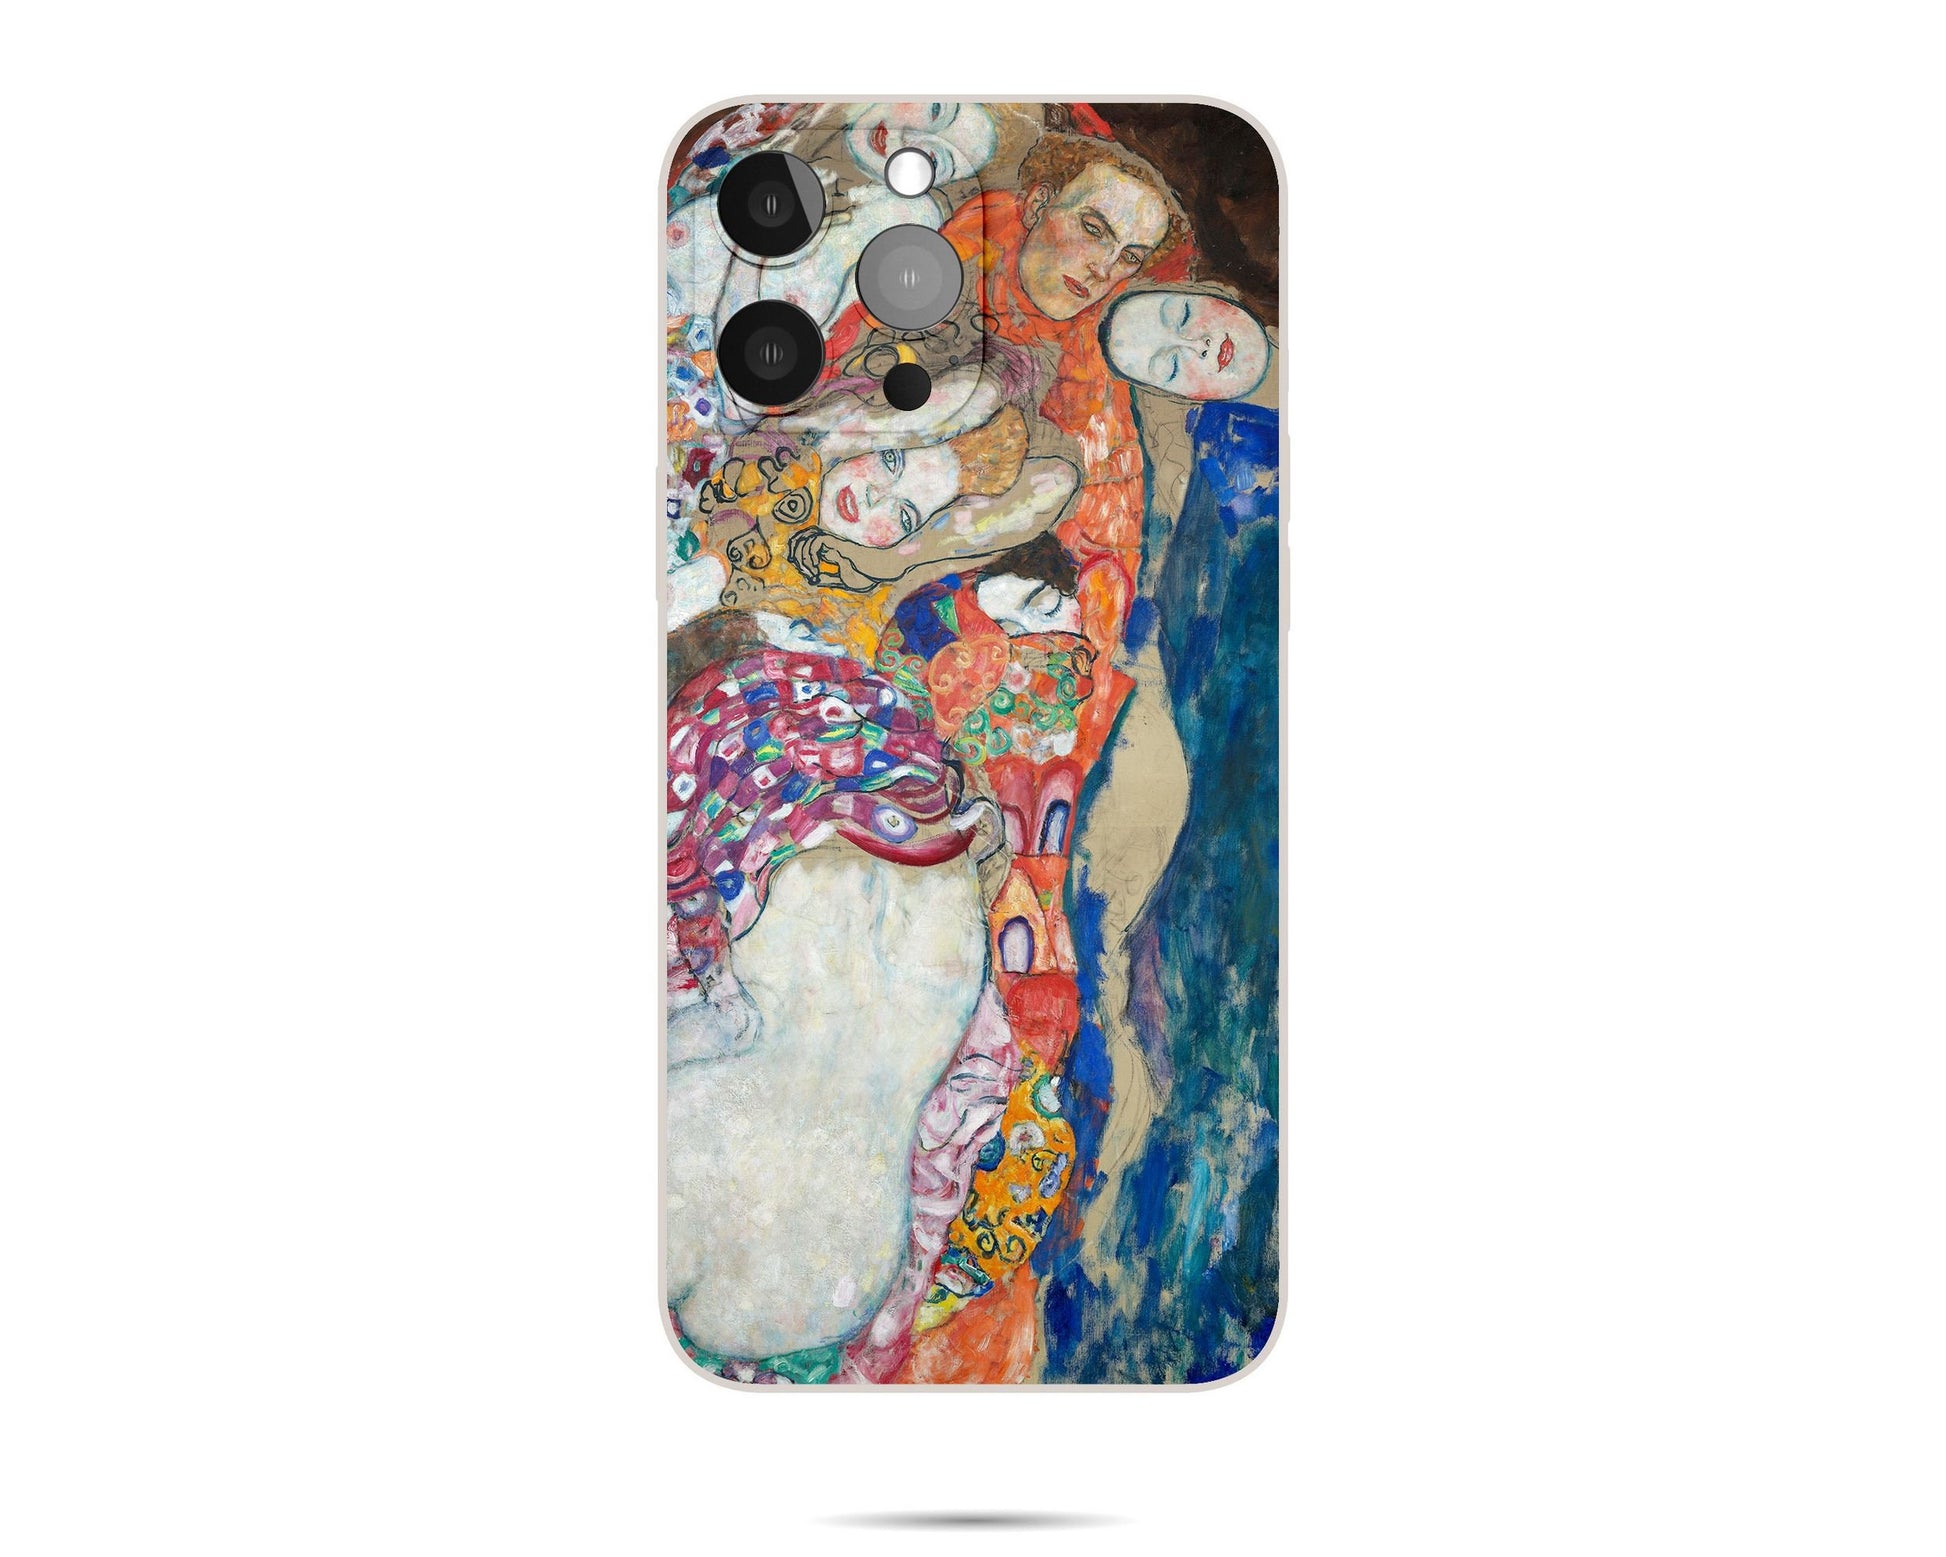 Iphone Case Of Gustav Klimt Painting The Bride, Iphone Cover, Iphone 12 Pro Case, Iphone Se 2020, Art Nouveau, Vivid Color, Aesthetic Iphone